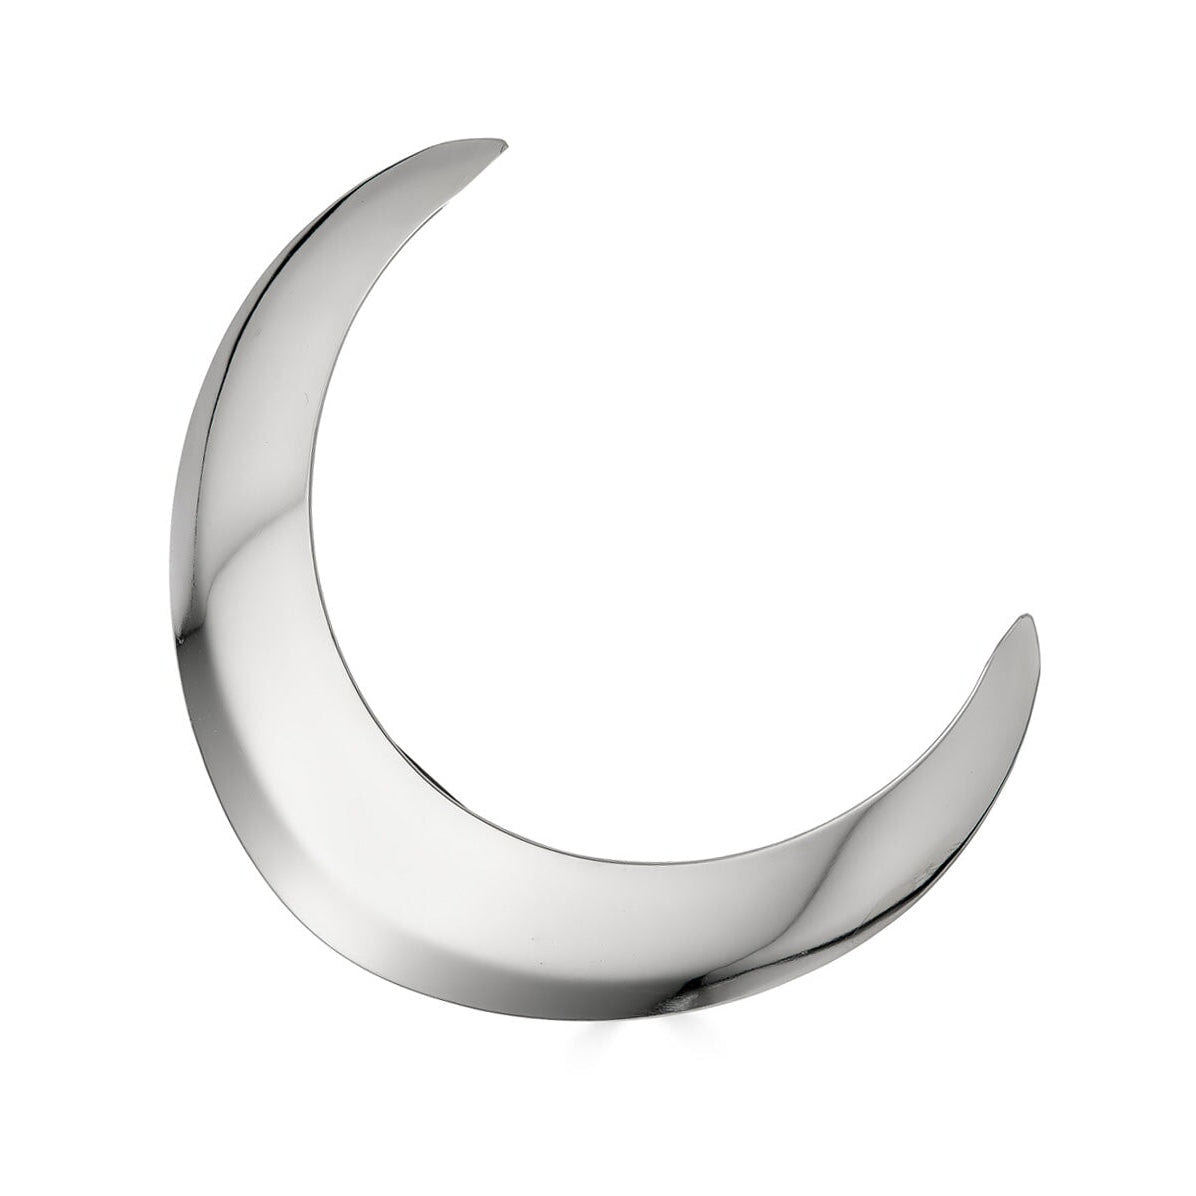 CRESCENT MOON BARRETTE - Epona Valley | Luxury Hair Accessories | Bridal Accessories | Made In NYC